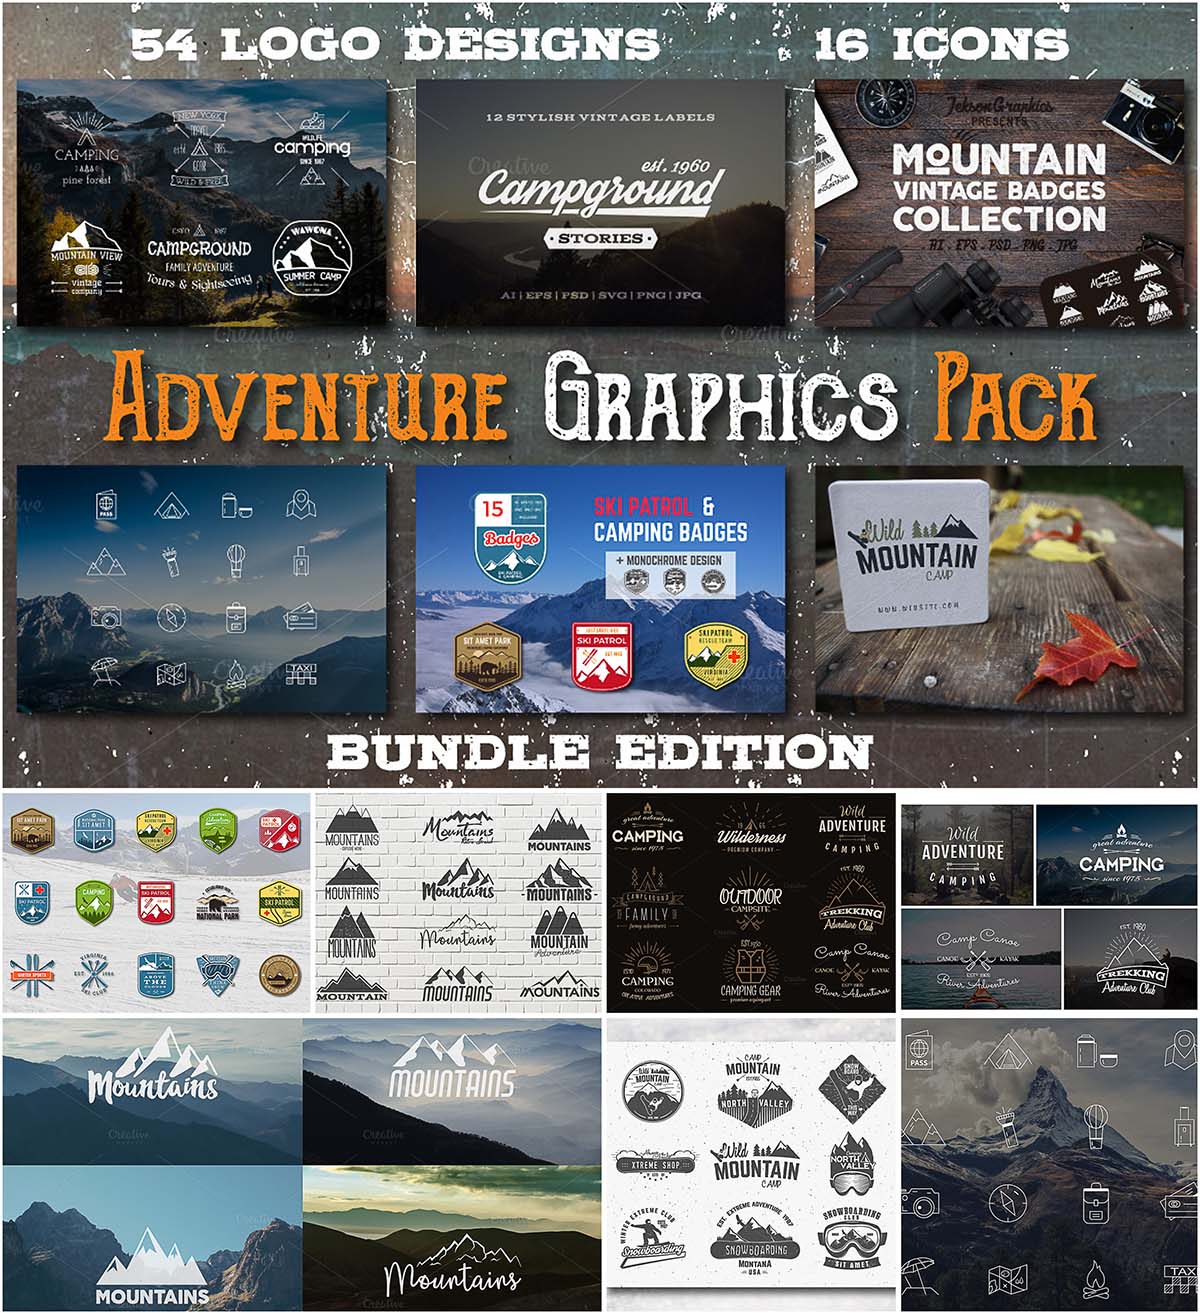 Mountain adventure graphics pack